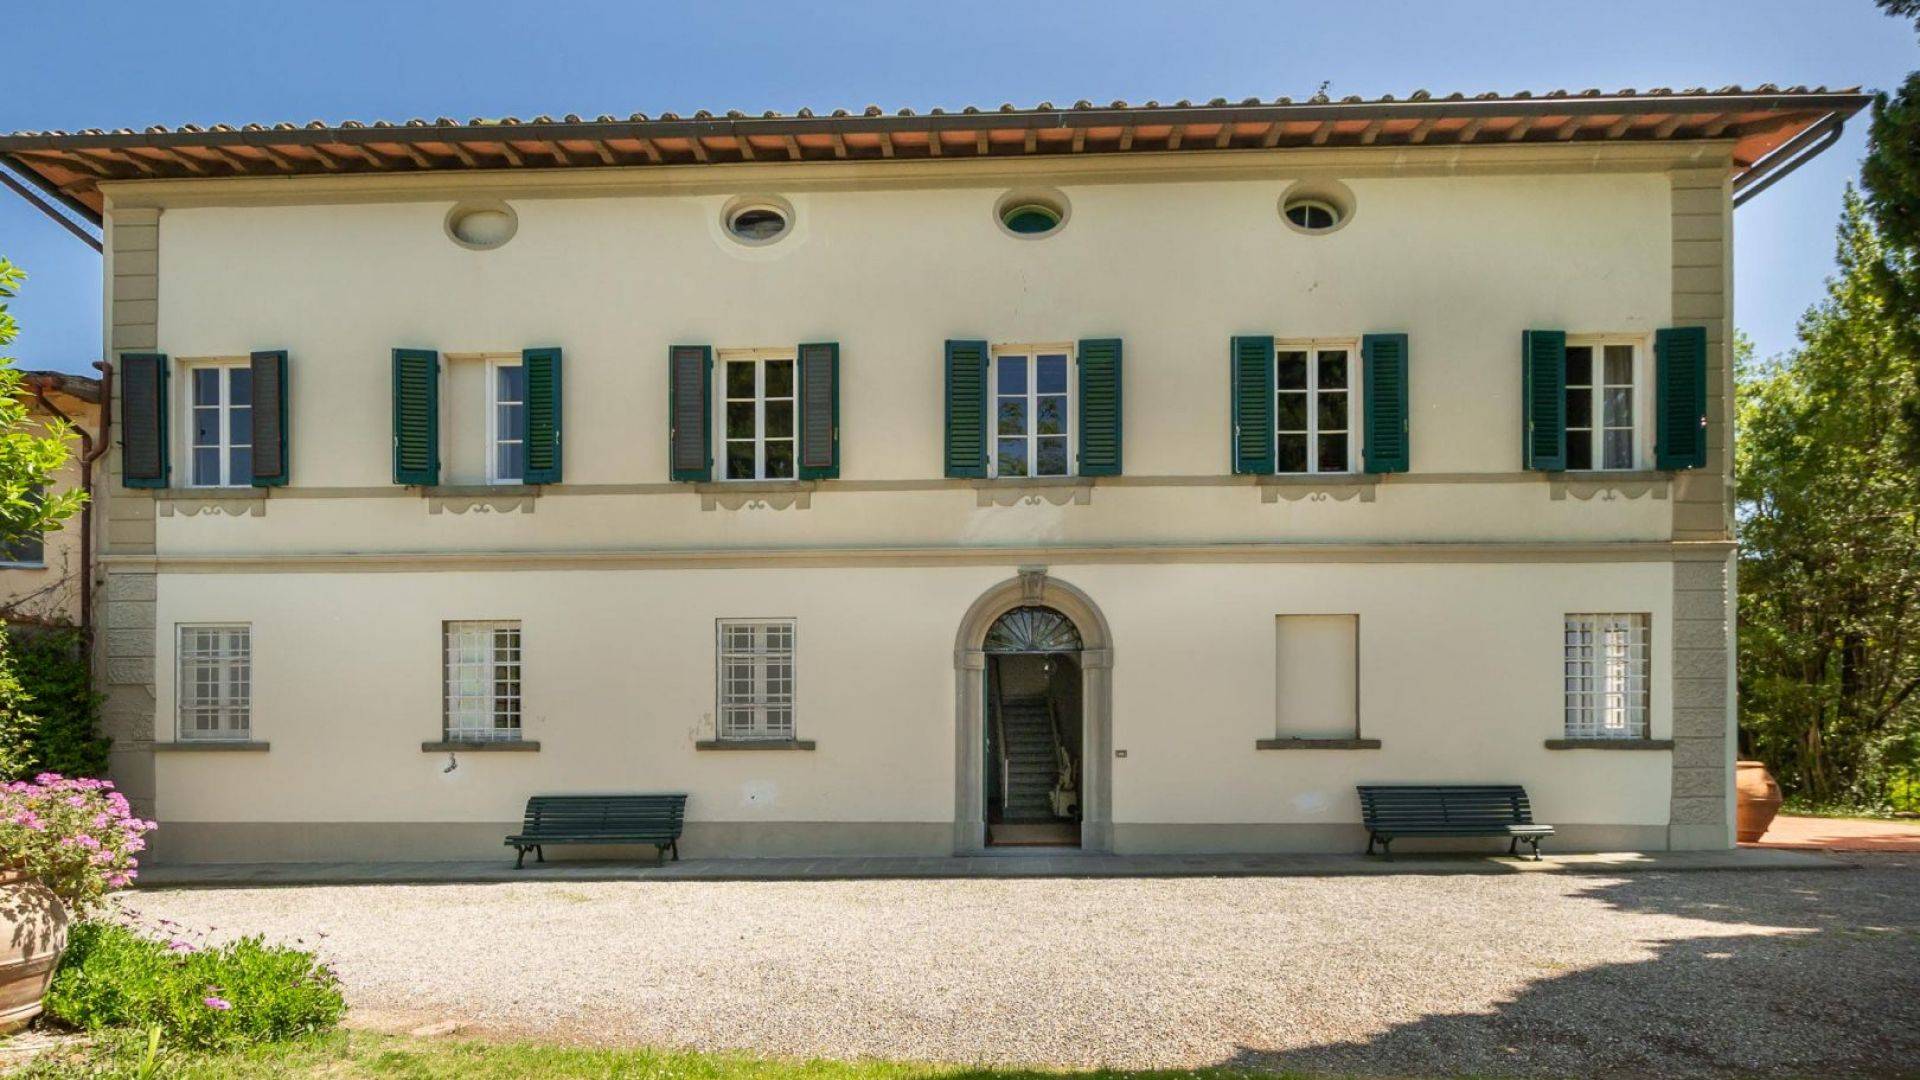 In a superb location, fabulous estate with a villa, land, vineyards and olive groves, for sale in the area of San Miniato, Pisa.